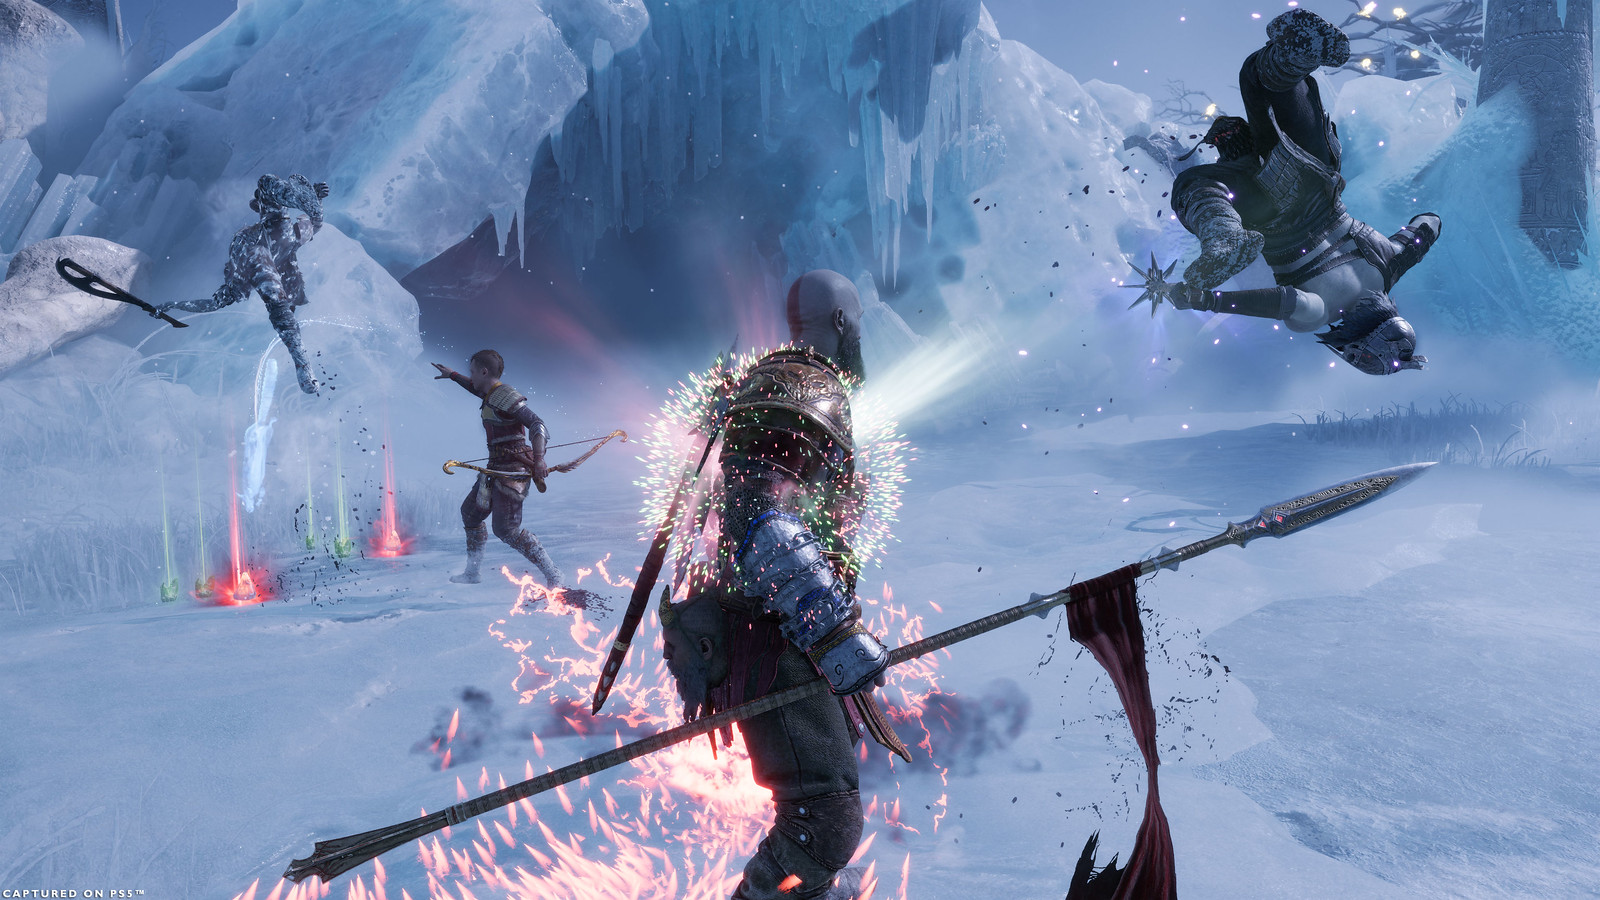 Kratos and Atreus fight against a pair of Draugr in the Niflheim Arena. Kratos is mid-stepping on a Health Crystal, the effects of Health and Rage gain envelop his chest. The Draugr closest to Kratos is being pushed away from the explosion caused by using the crystal. Atreus is using his Runic Summon Bitter Squirrel, which is dropping both Health and Rage Stones onto the arena floor. 